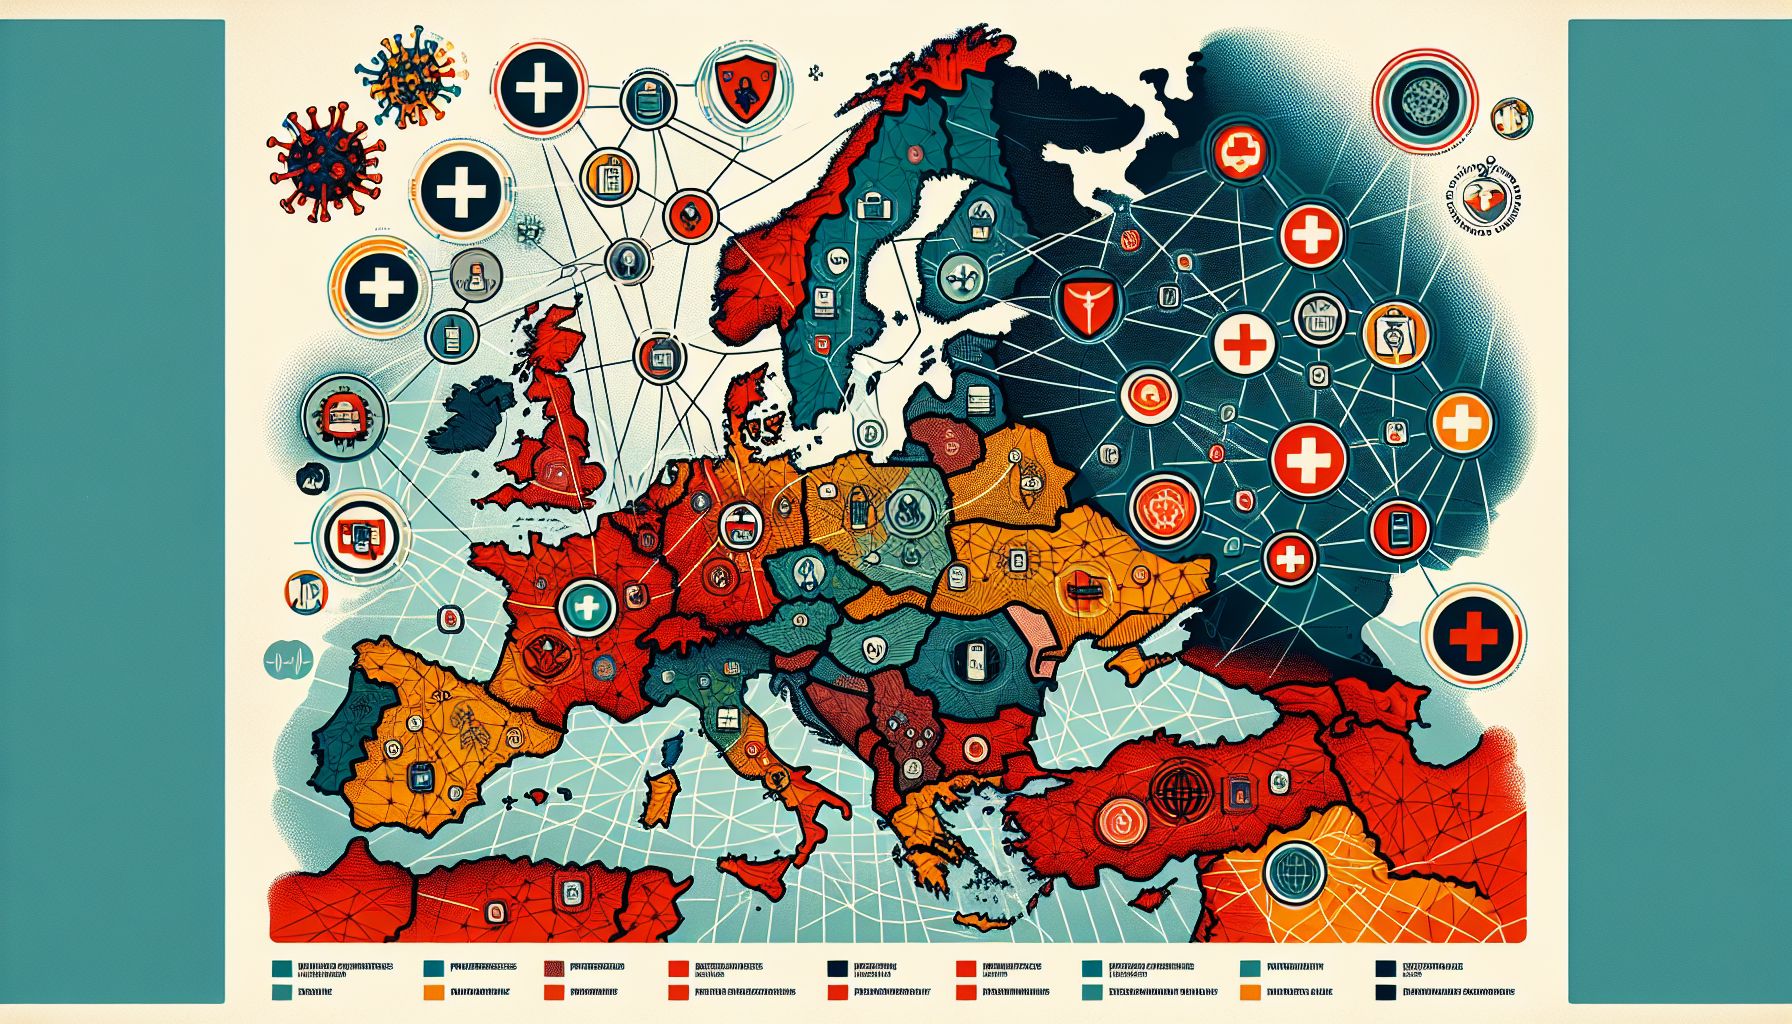 The Preparedness and Response of European Health Systems: A Look at the Current Situation